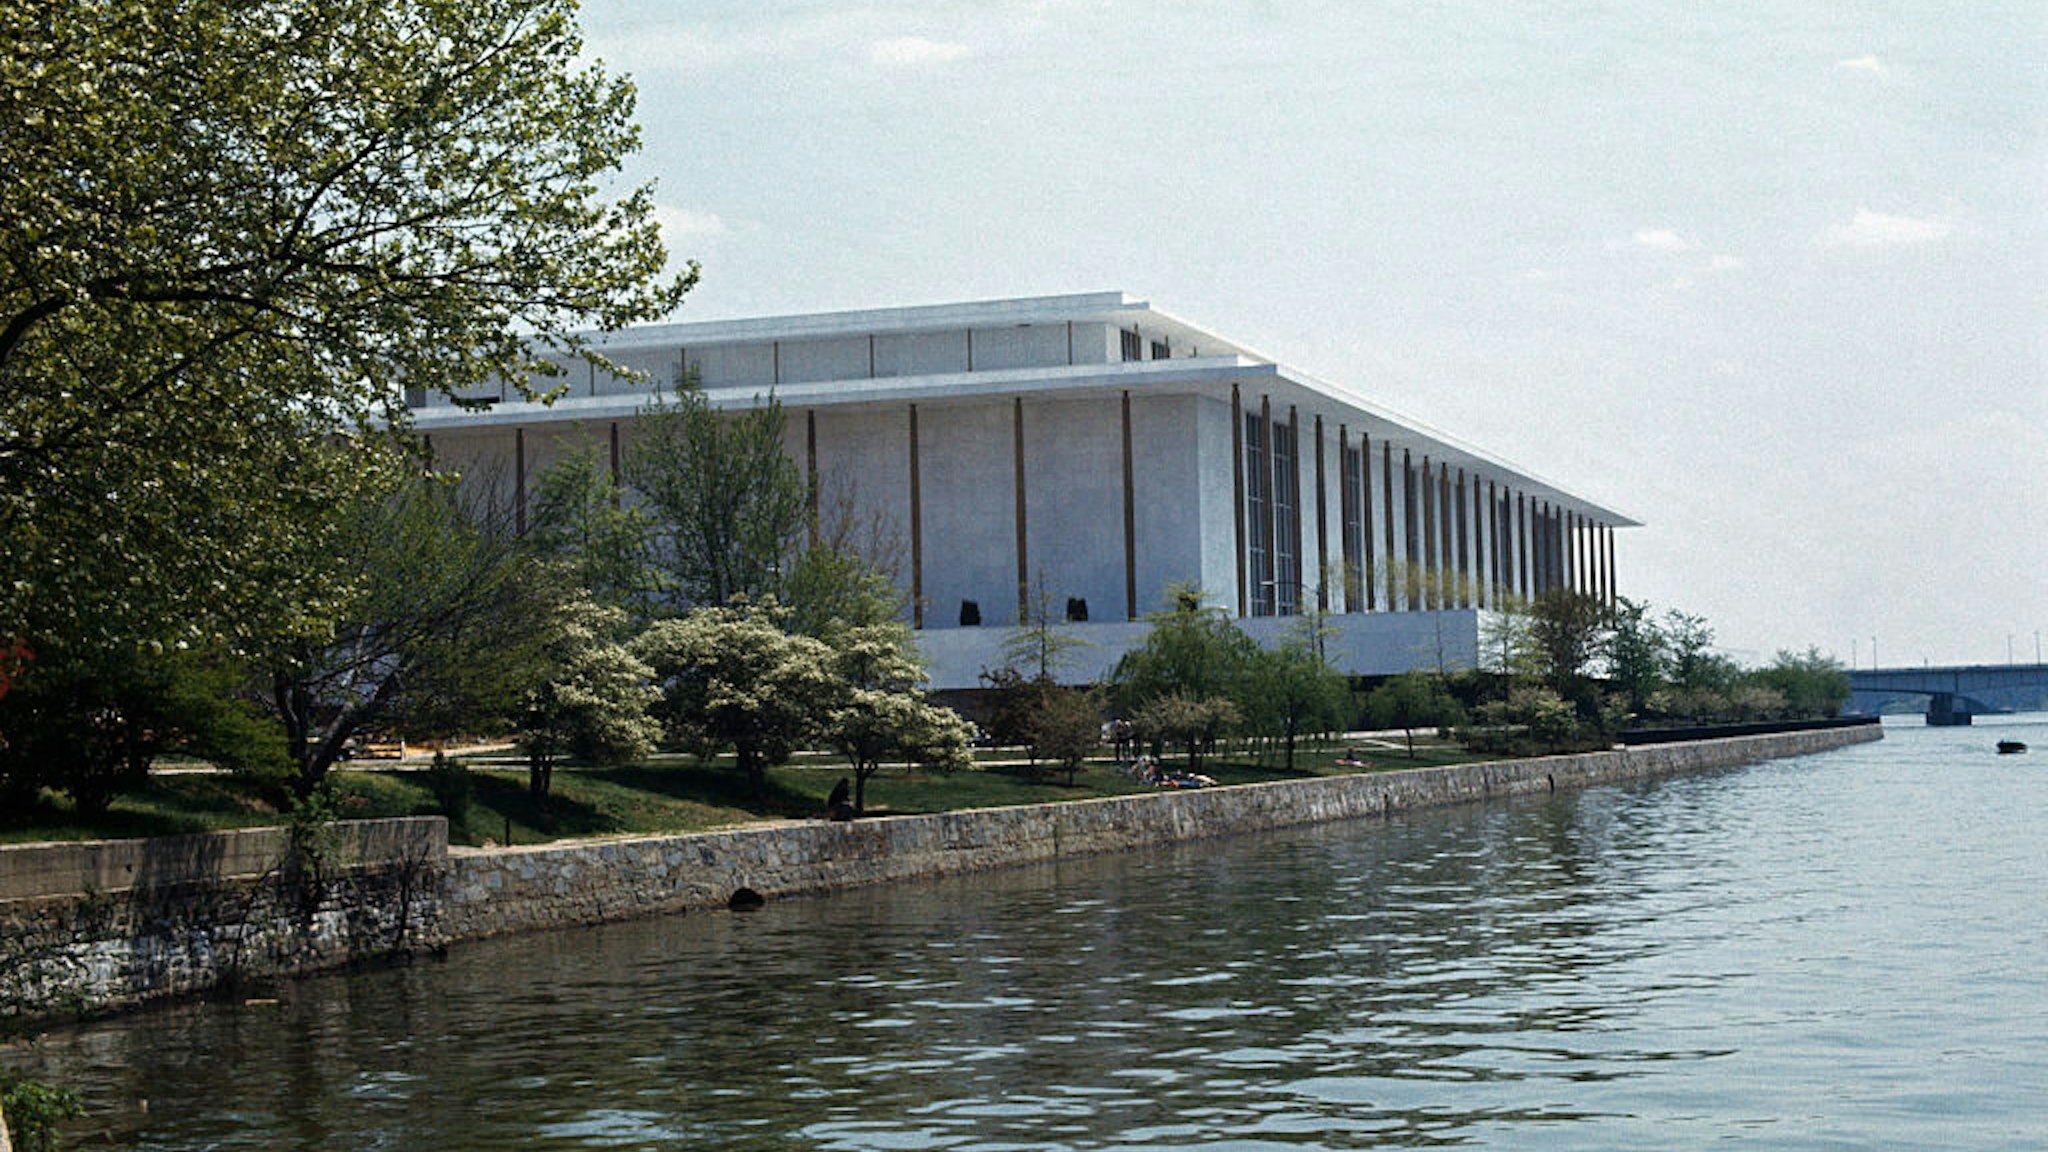 Exterior views of the John F. Kennedy Center for the Performing Arts. The building is situated at river's edge and is surrounded by trees.